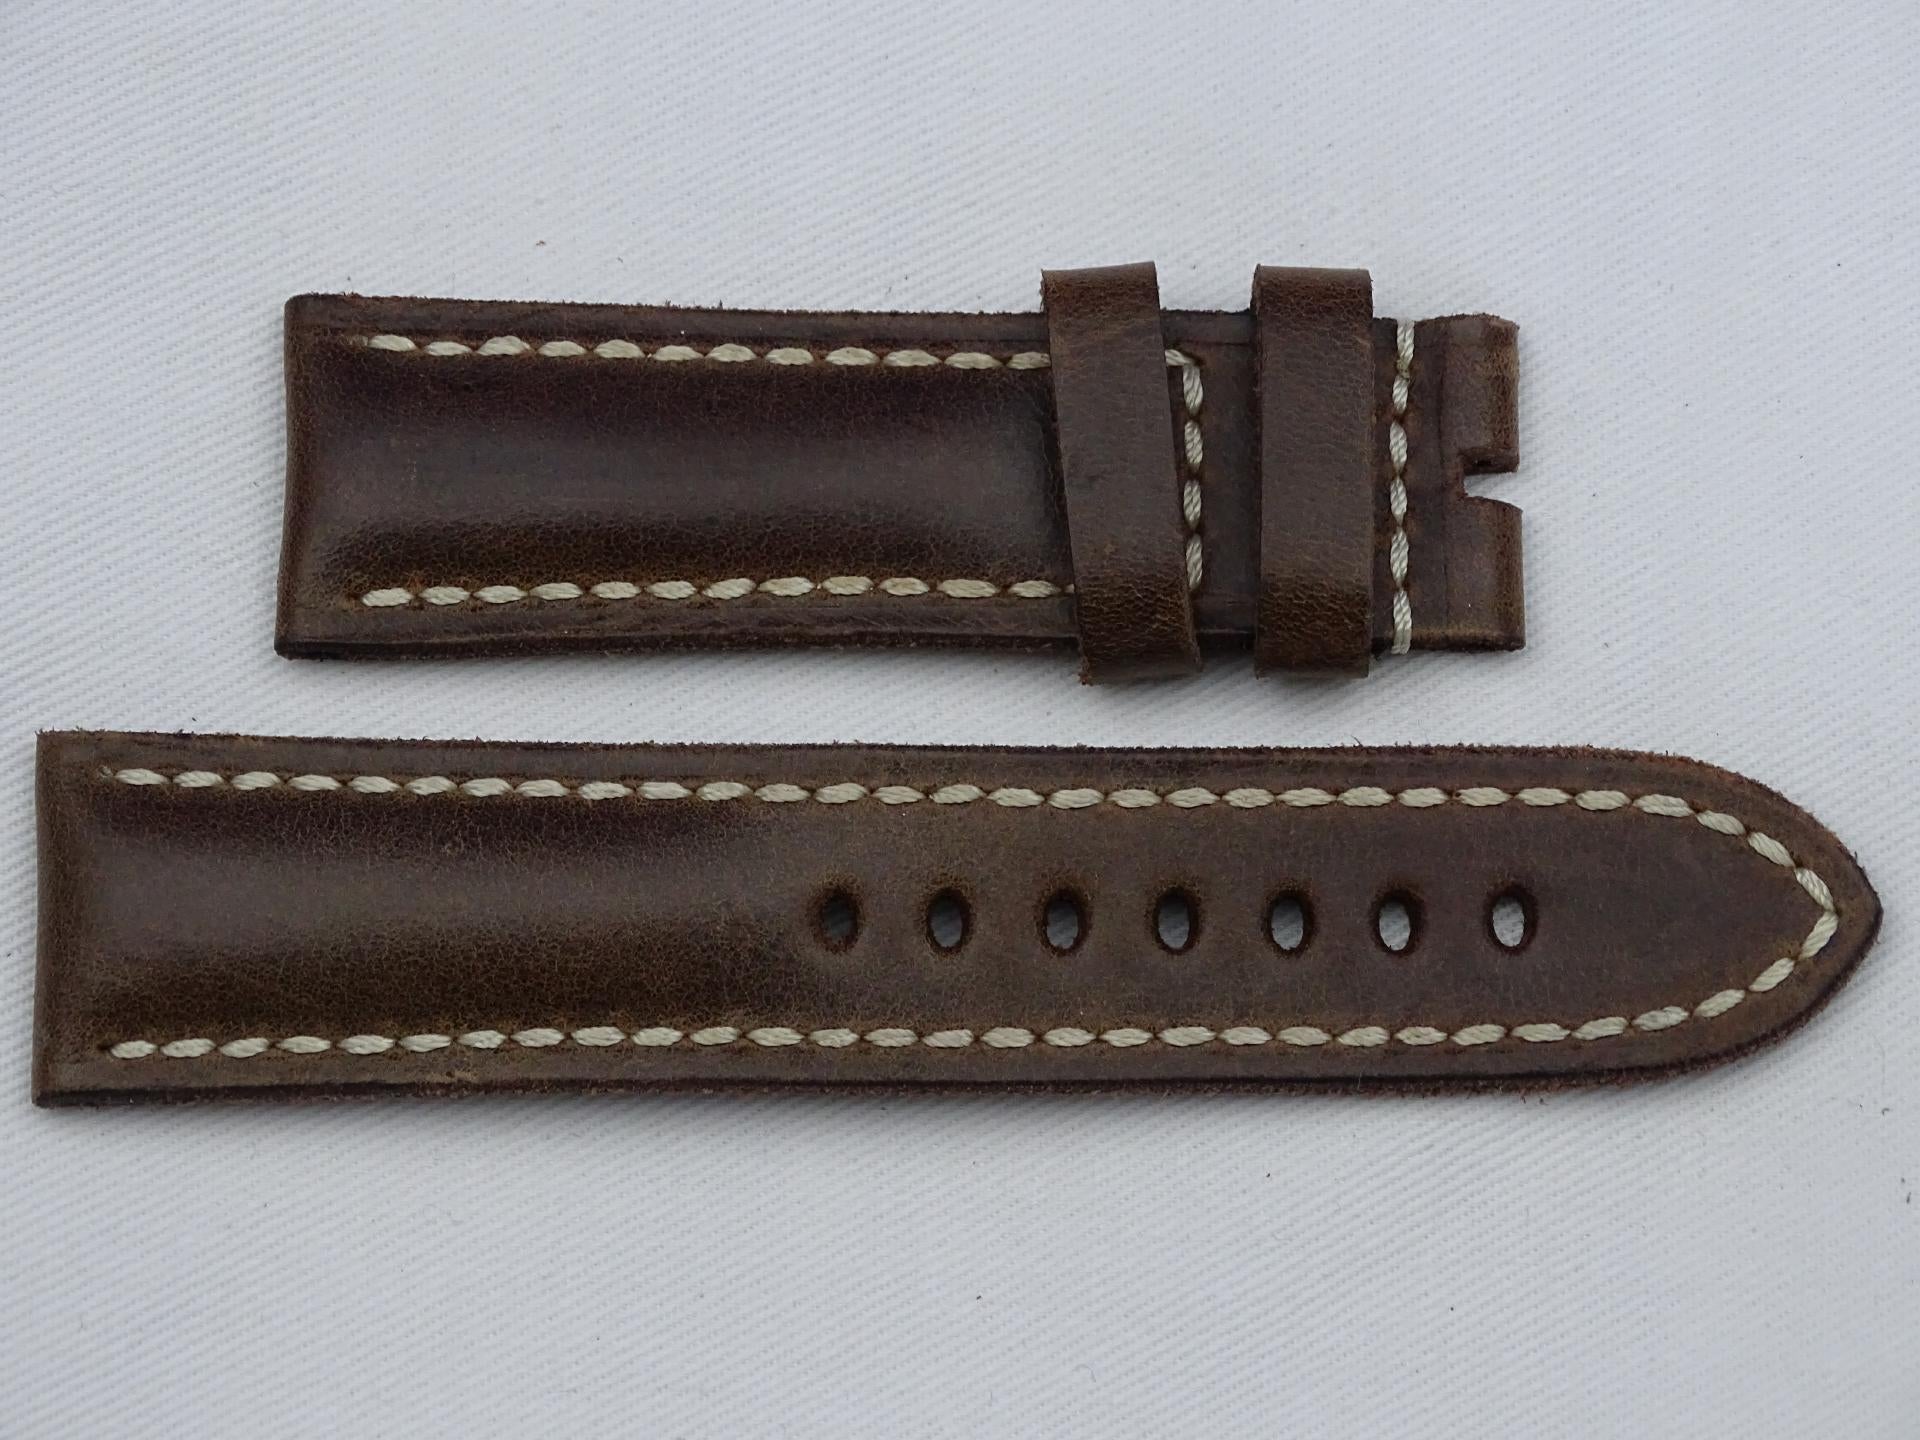 Leather Strap brown with beige stitching